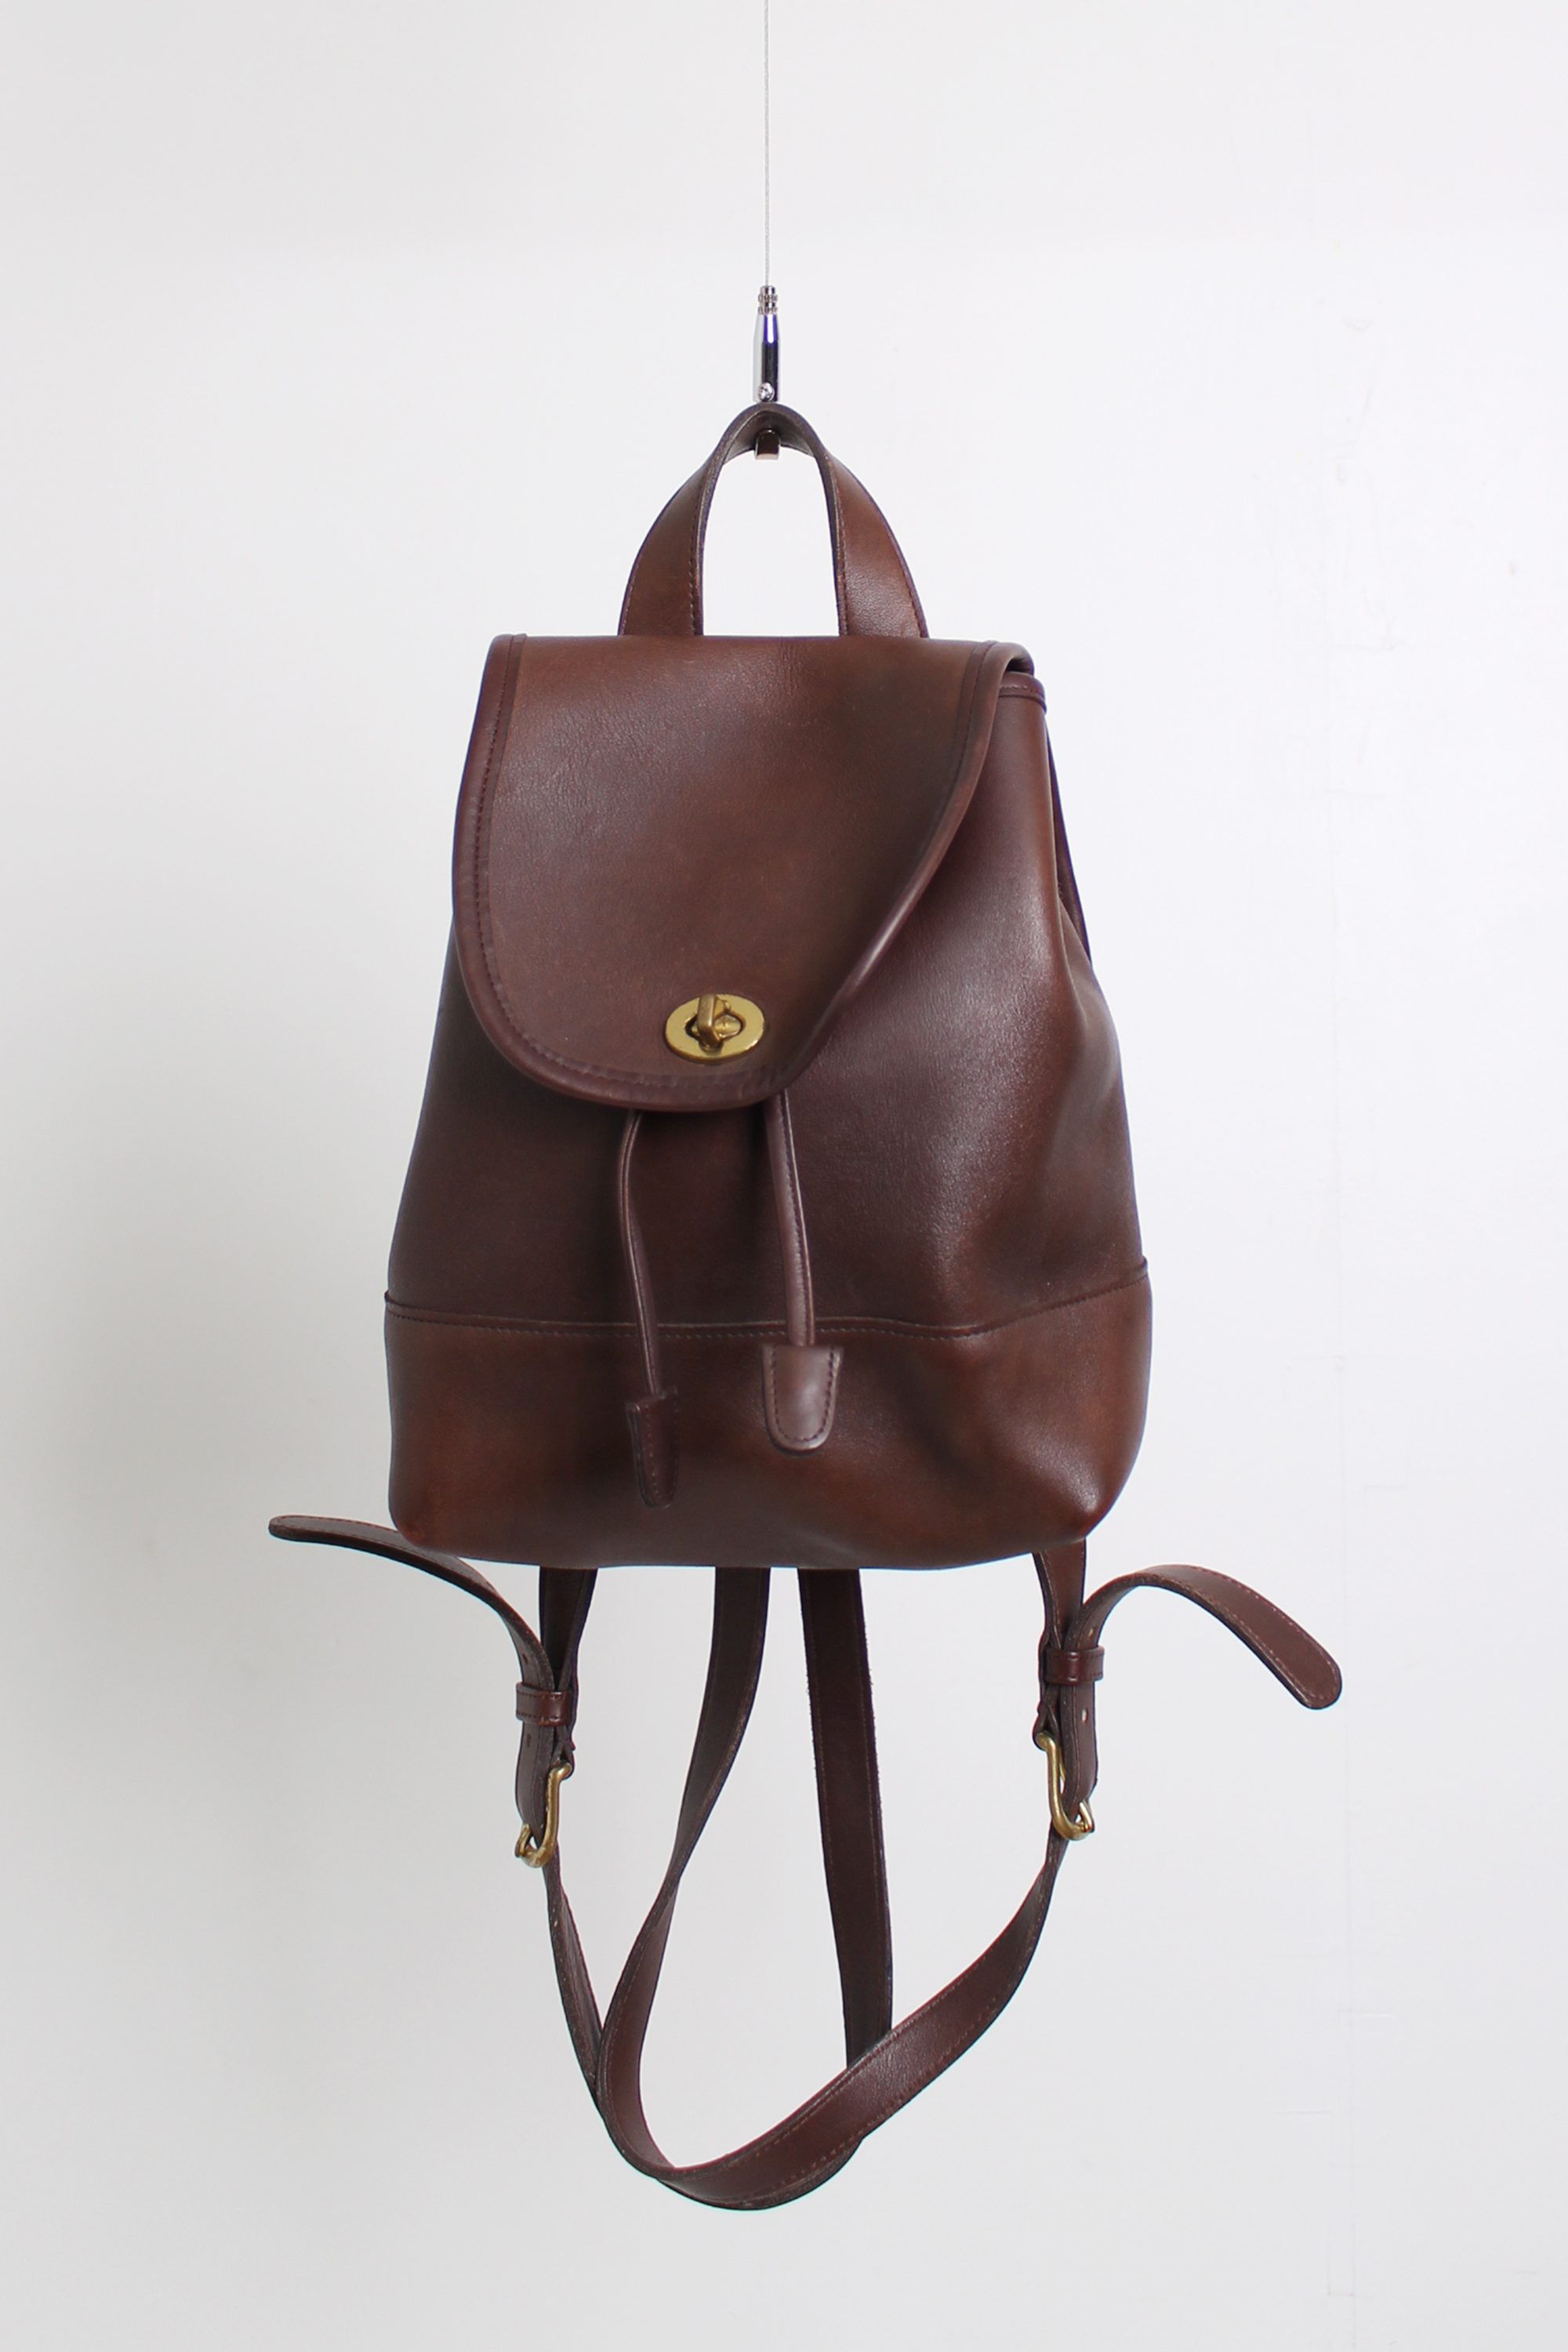 COACH glove tanned leather backpack